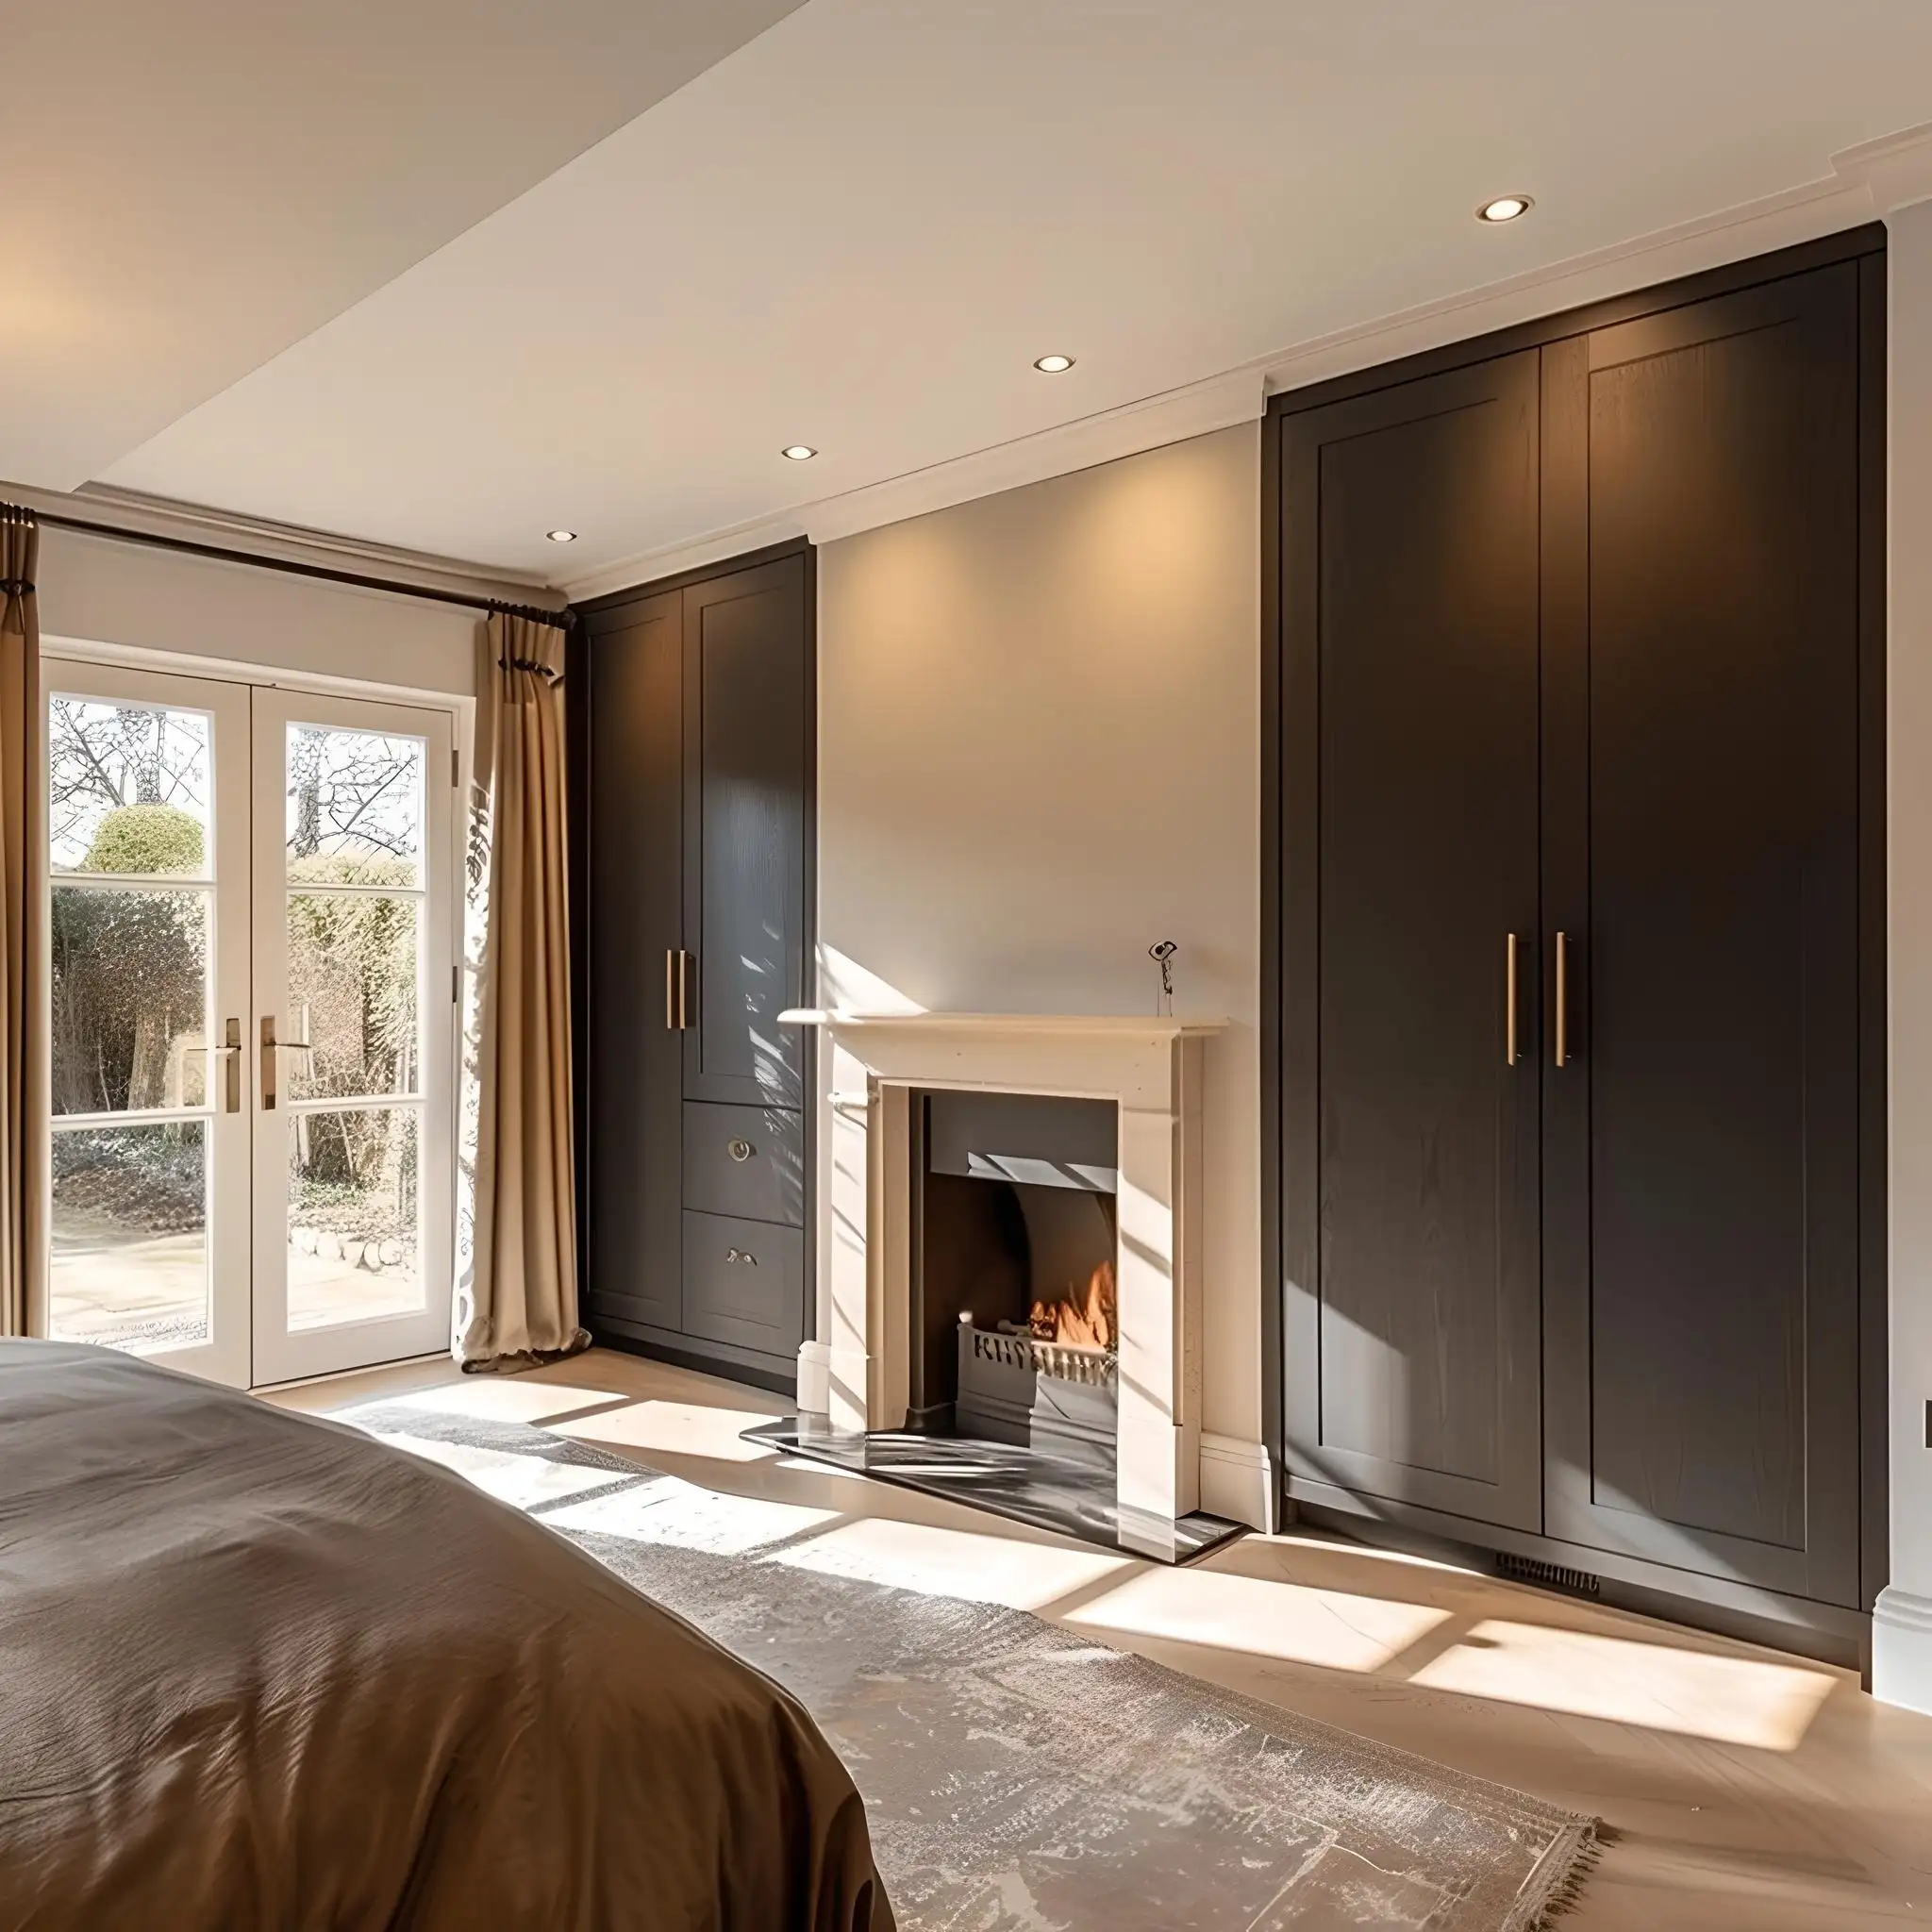 Custom built-in wardrobes fitting into alcoves